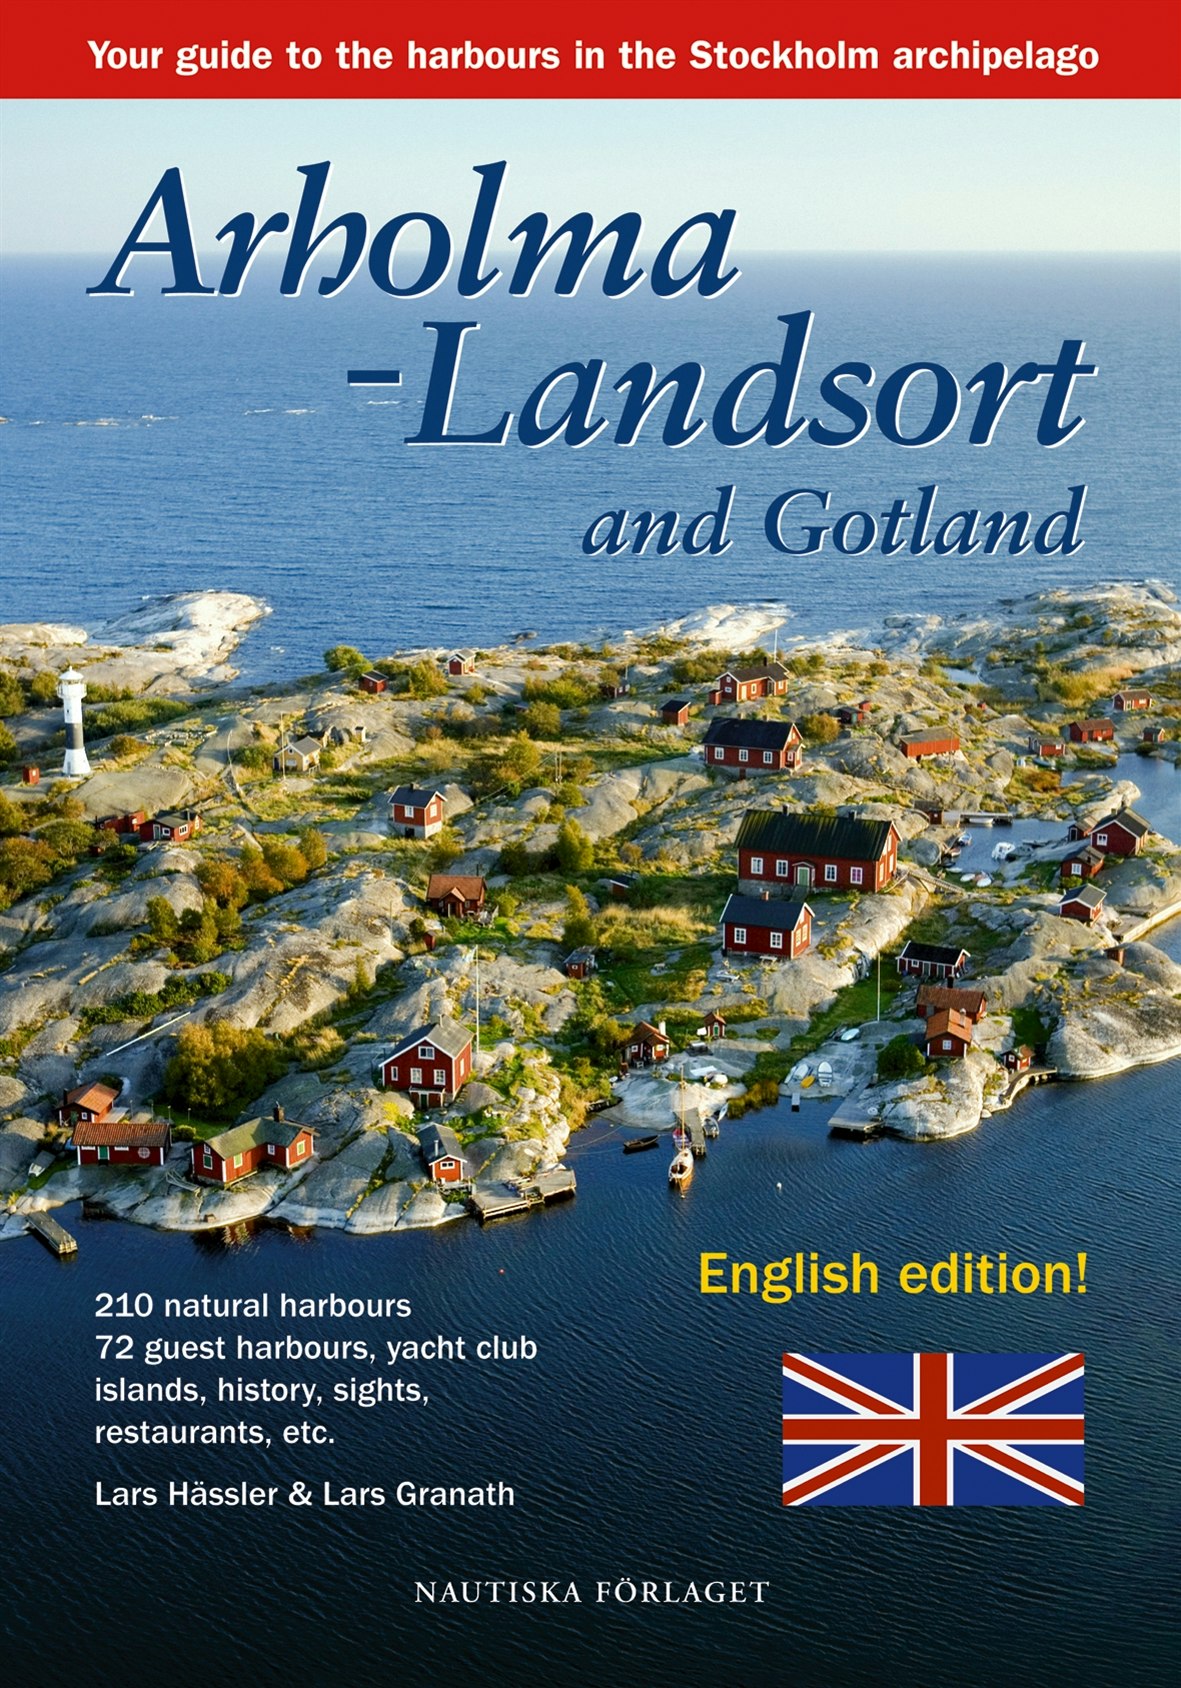 Arholma-Landsort and Gotland : your guide to the harbours in the Stockholms archipelago